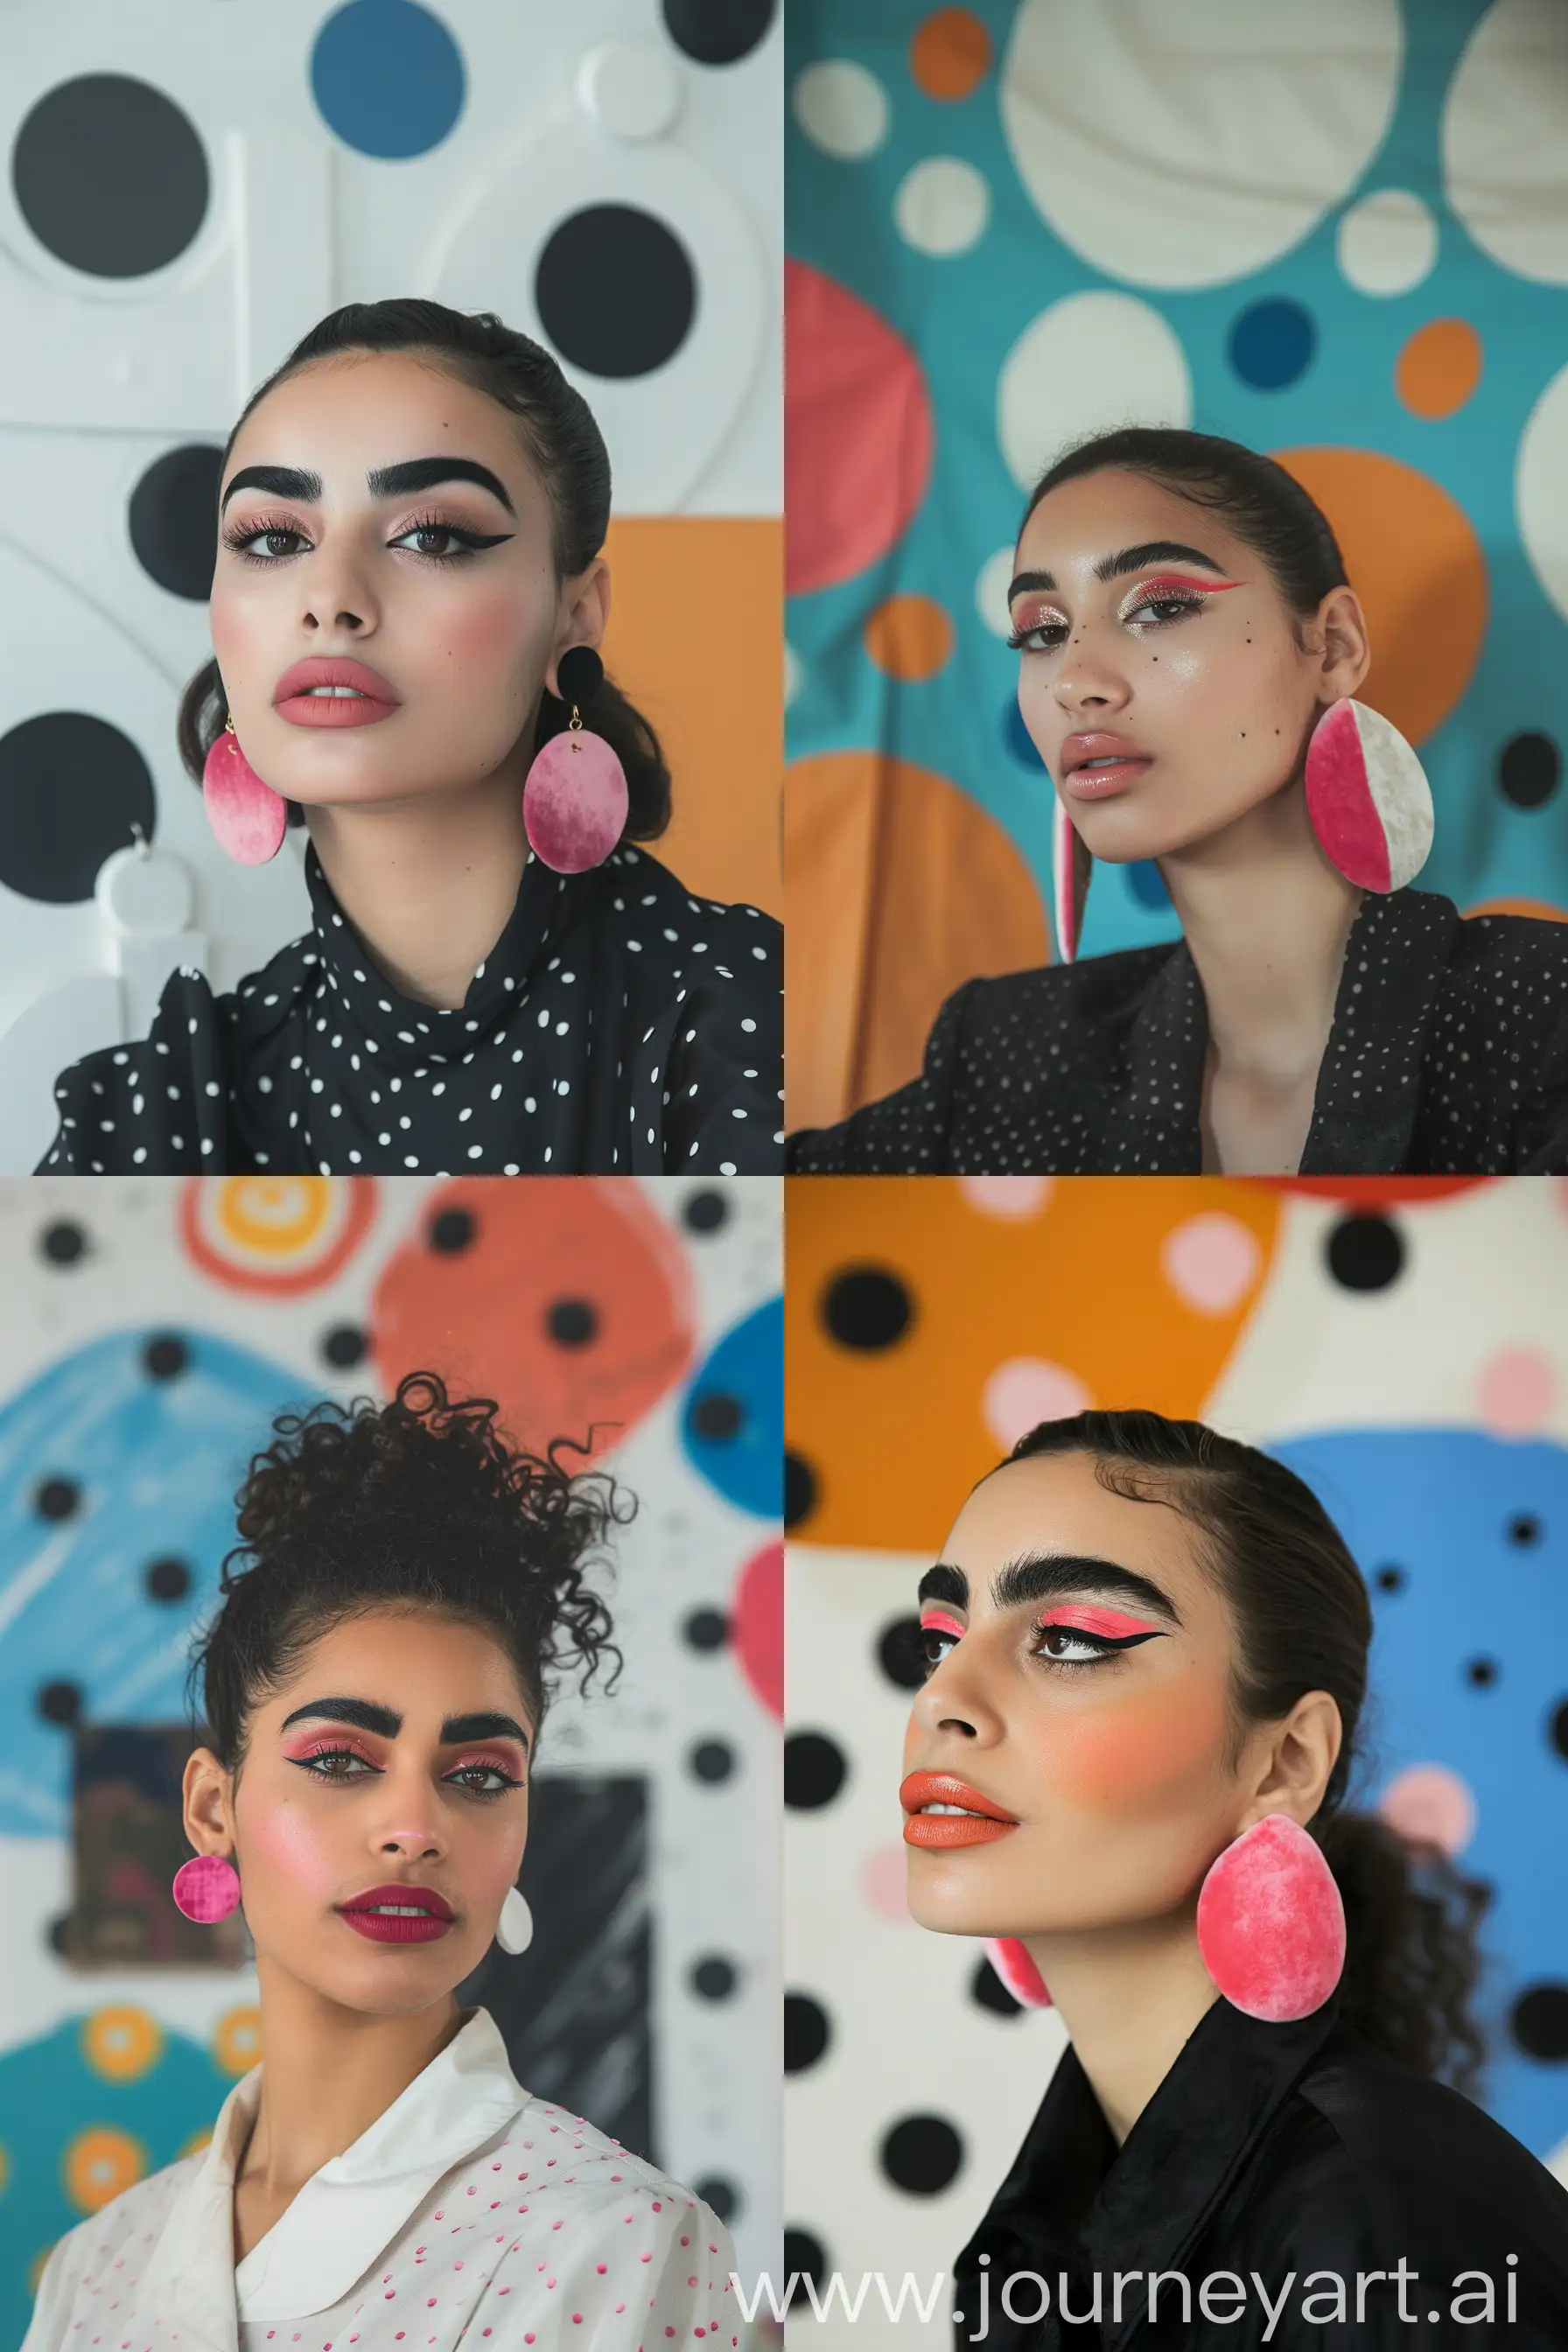 Modern-Egyptian-Woman-Posing-in-Art-Gallery-with-Bold-Makeup-and-Velvet-Earrings